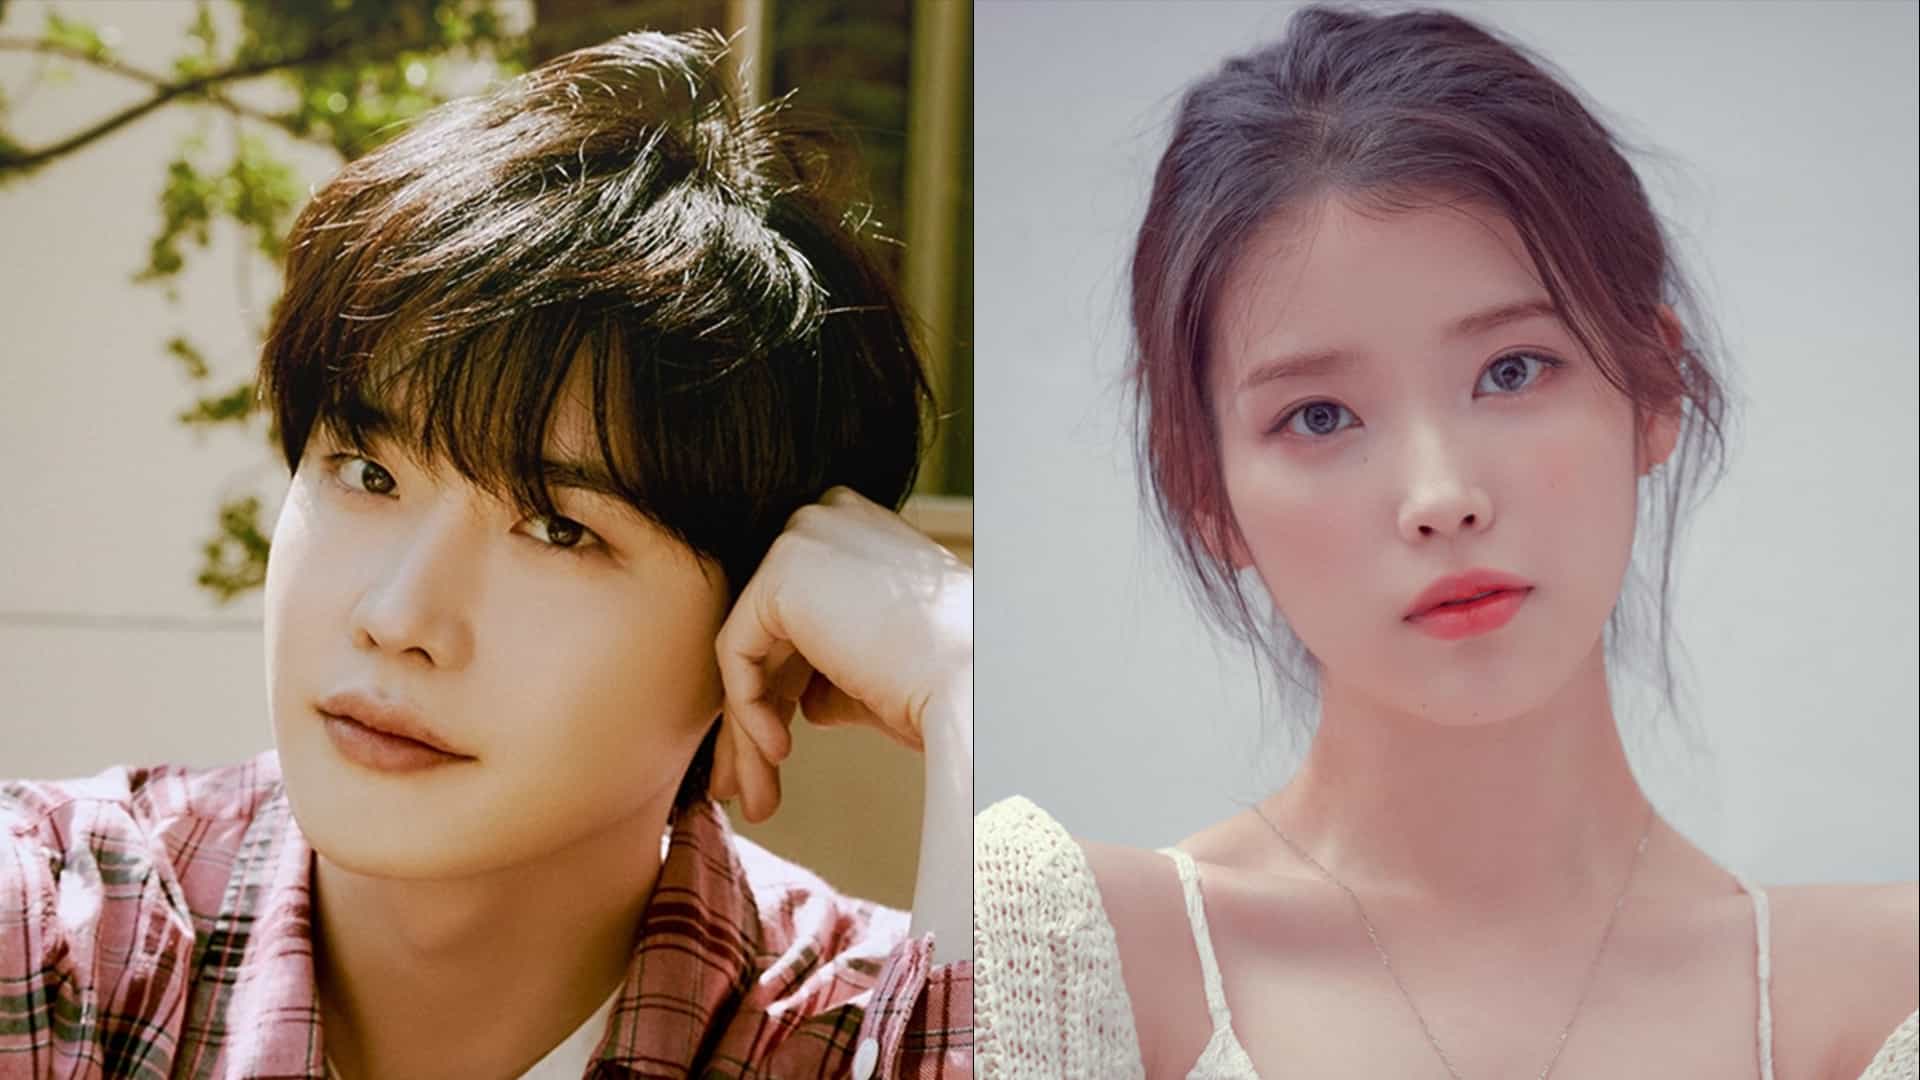 IT'S OFFICIAL: IU and Lee Jong Suk are dating!